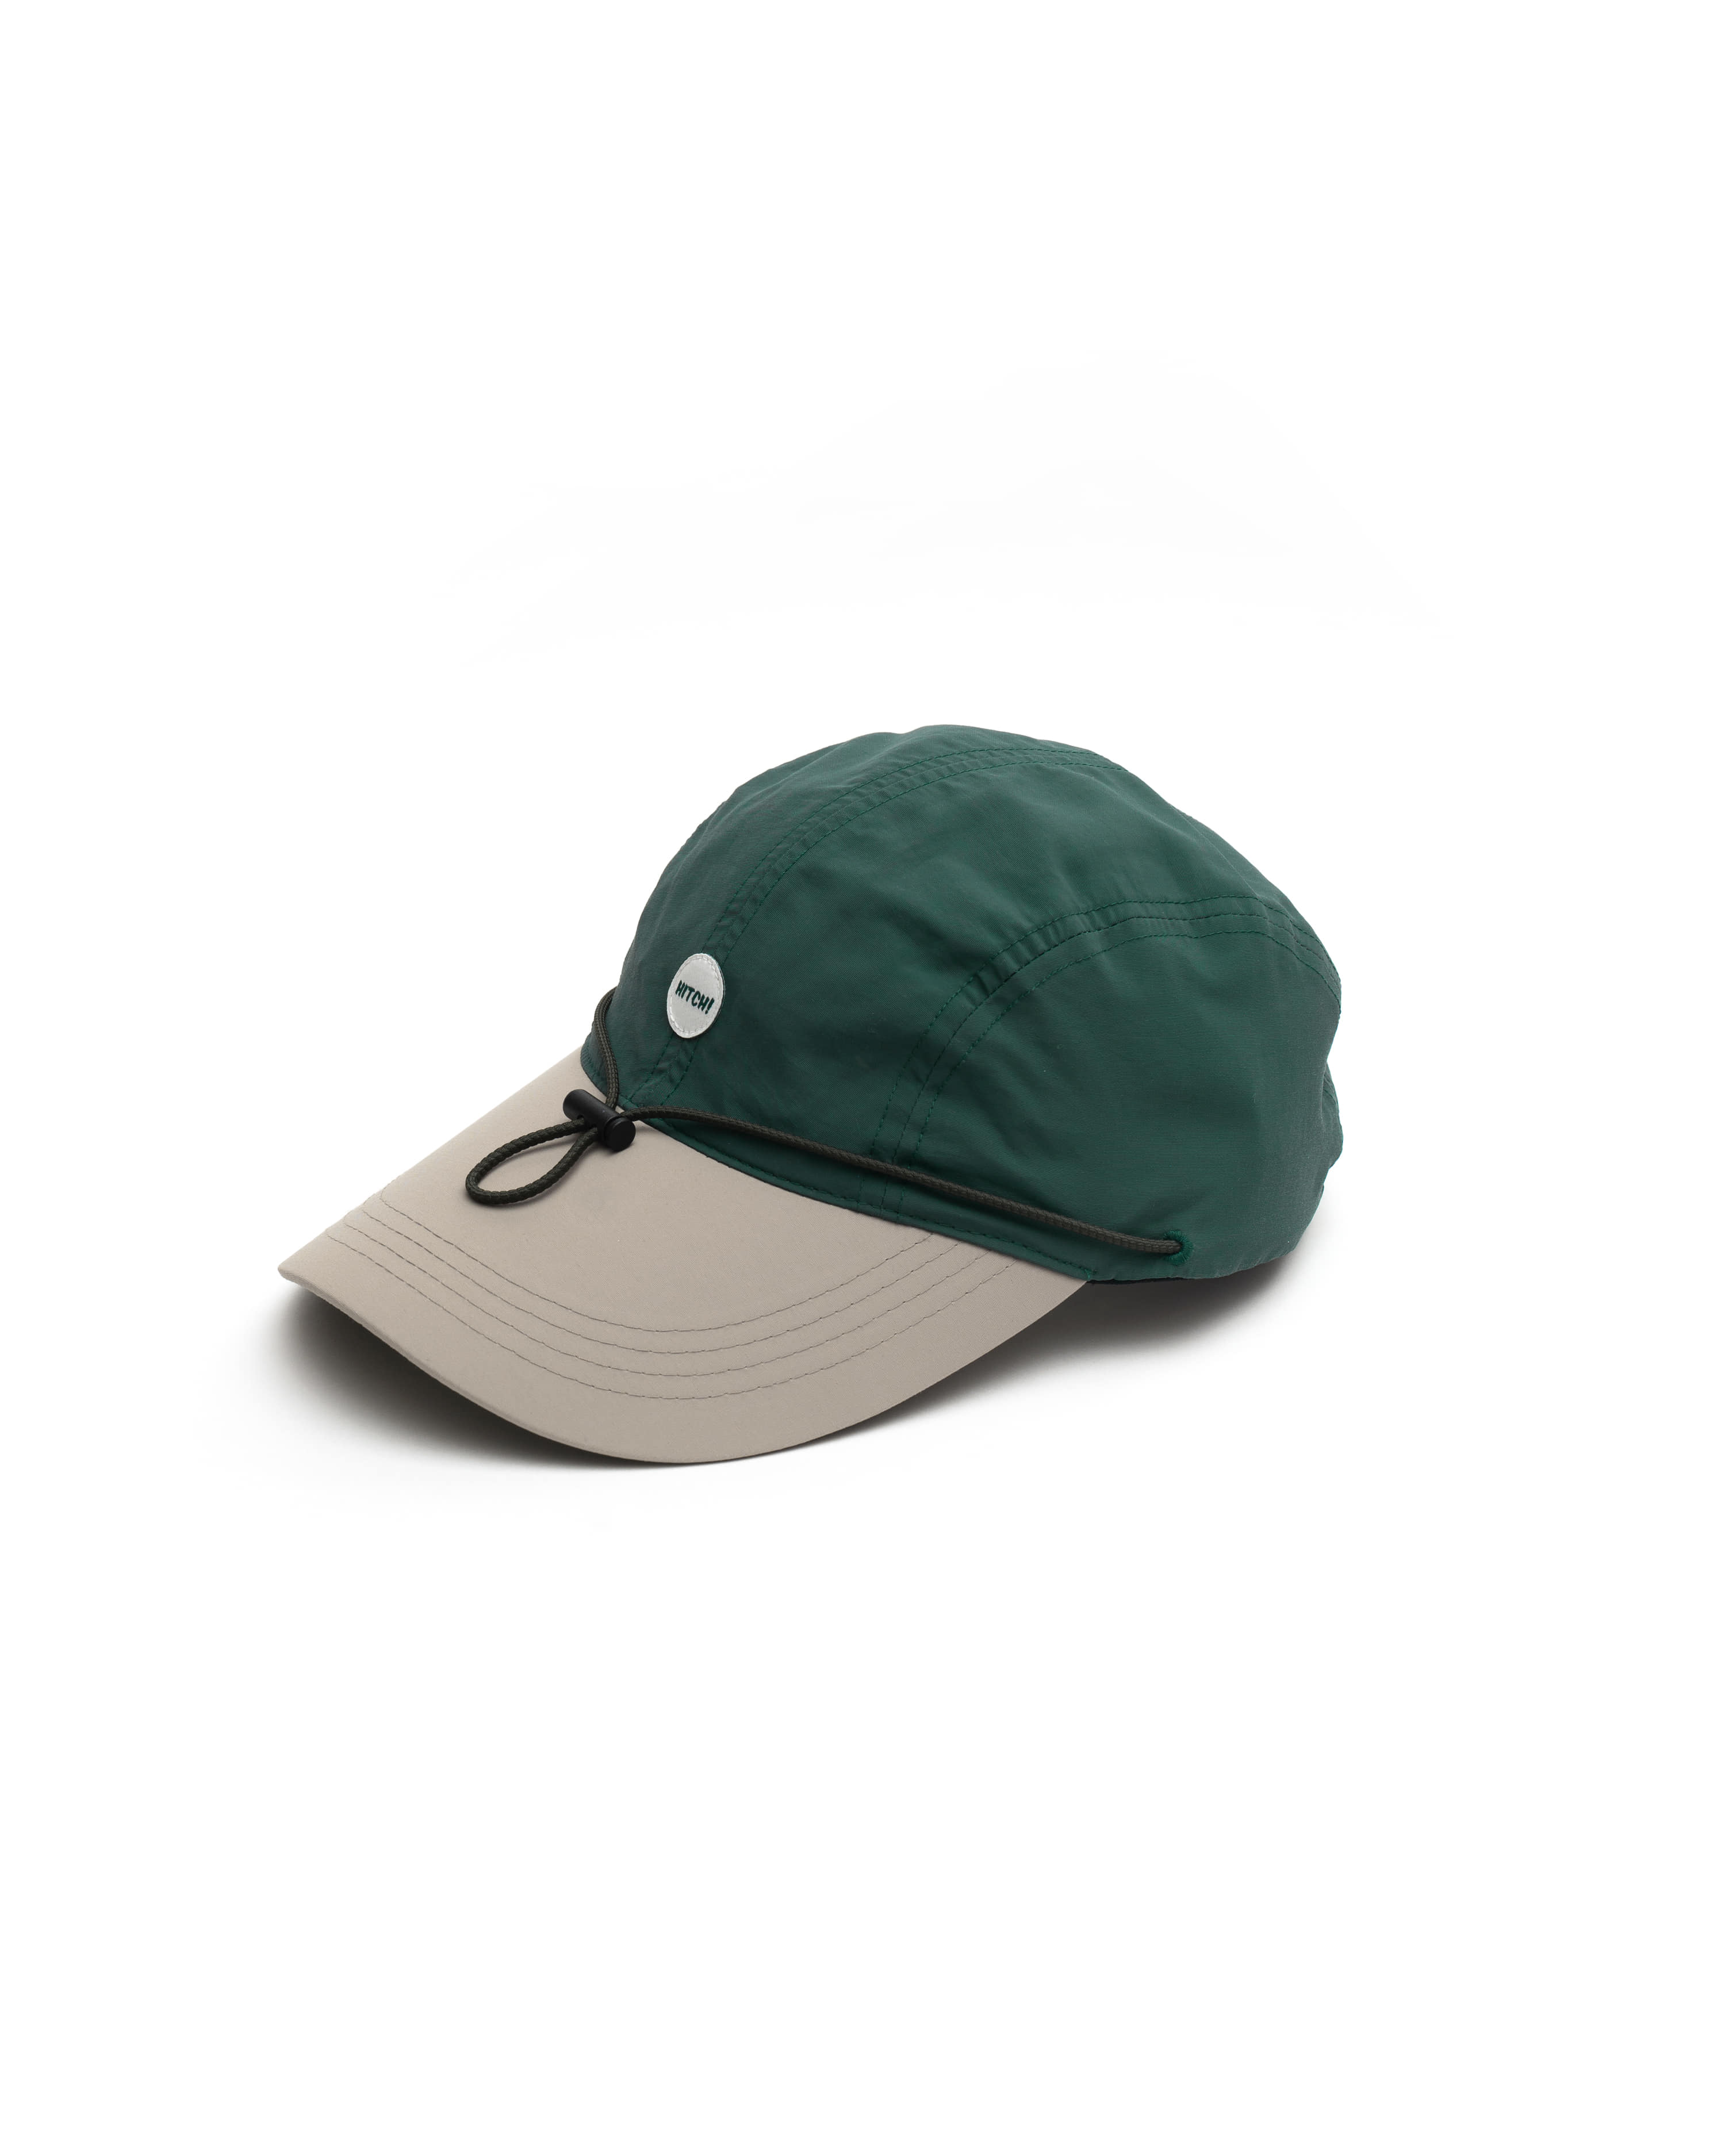 [out of stock]River - Green (Longbill)